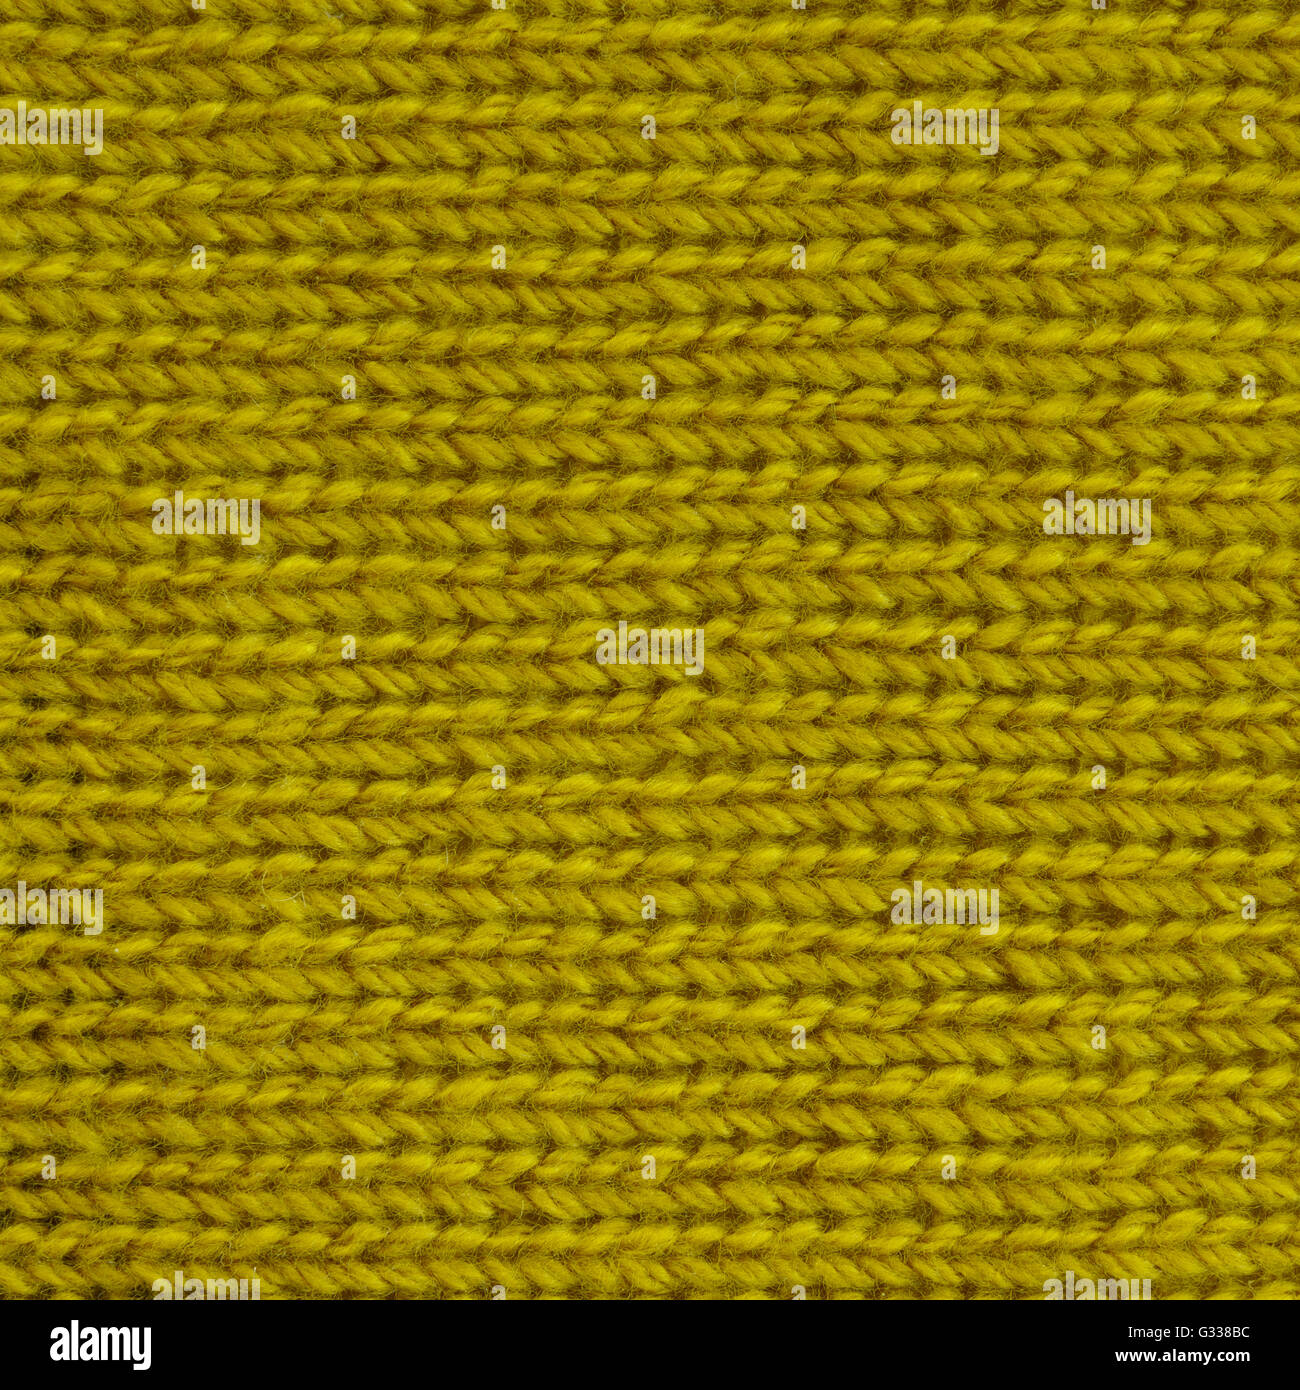 Yellow curry wool knitted fabric. Close up fragment of the top view. Stock Photo